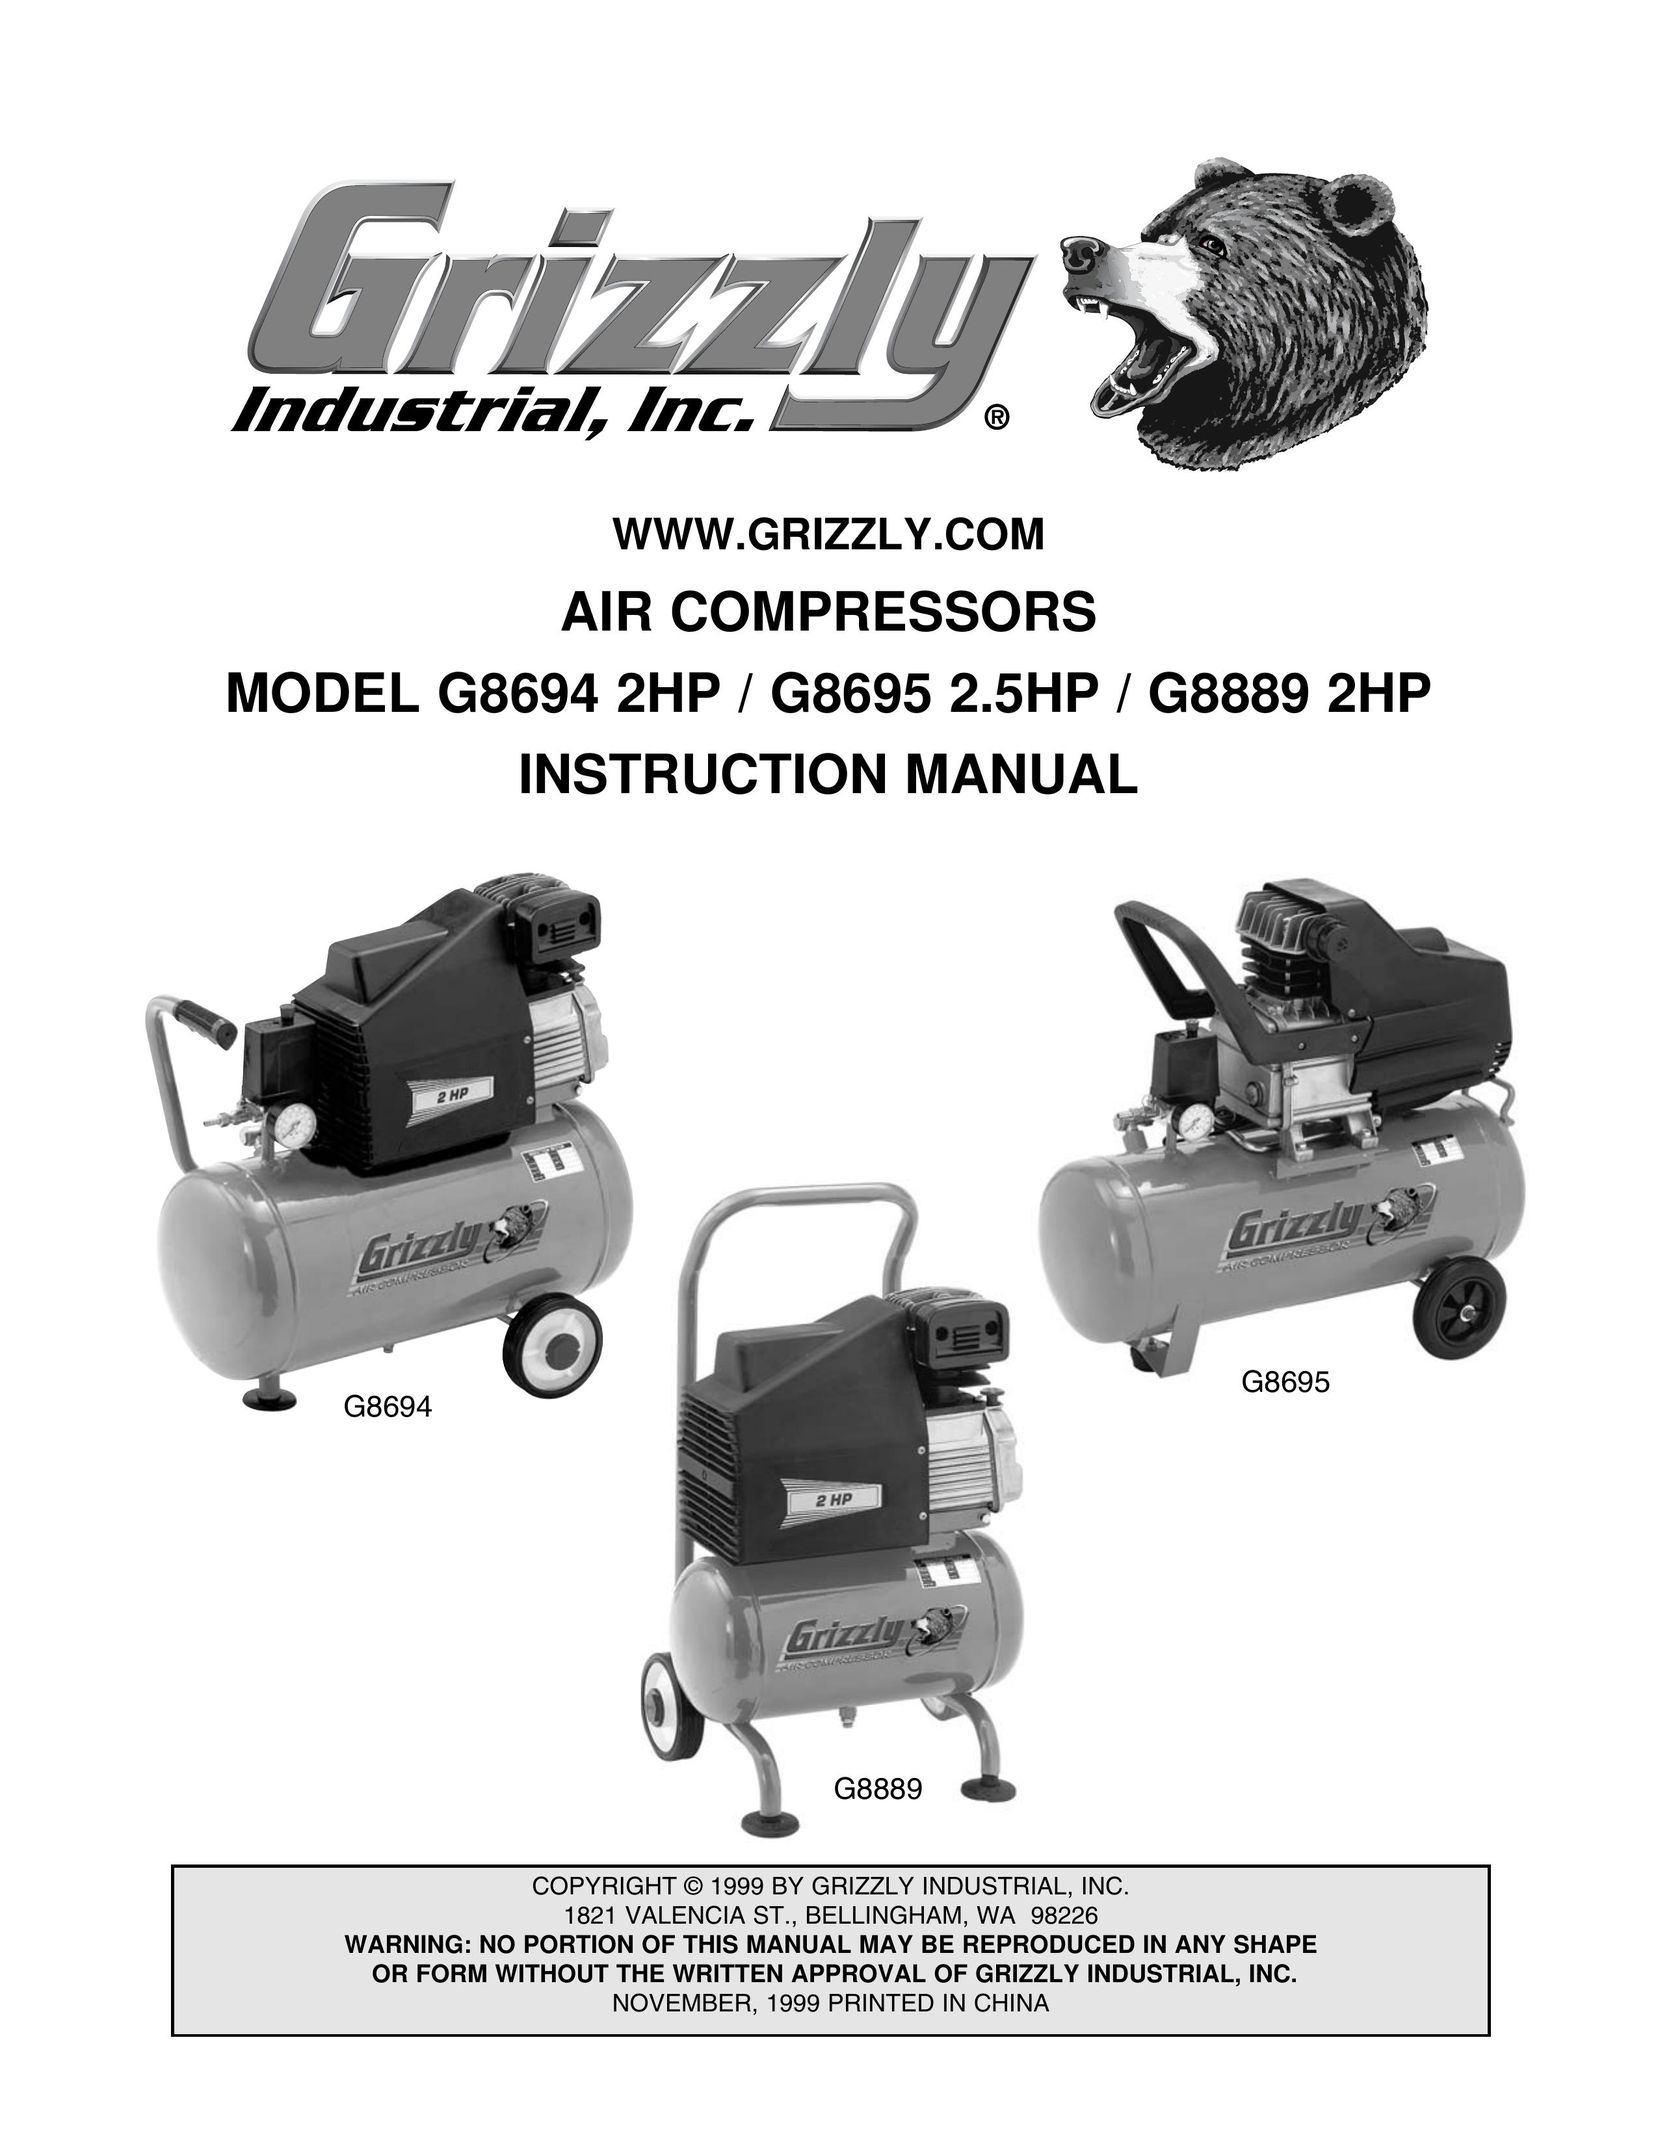 Grizzly G8695 Air Compressor User Manual